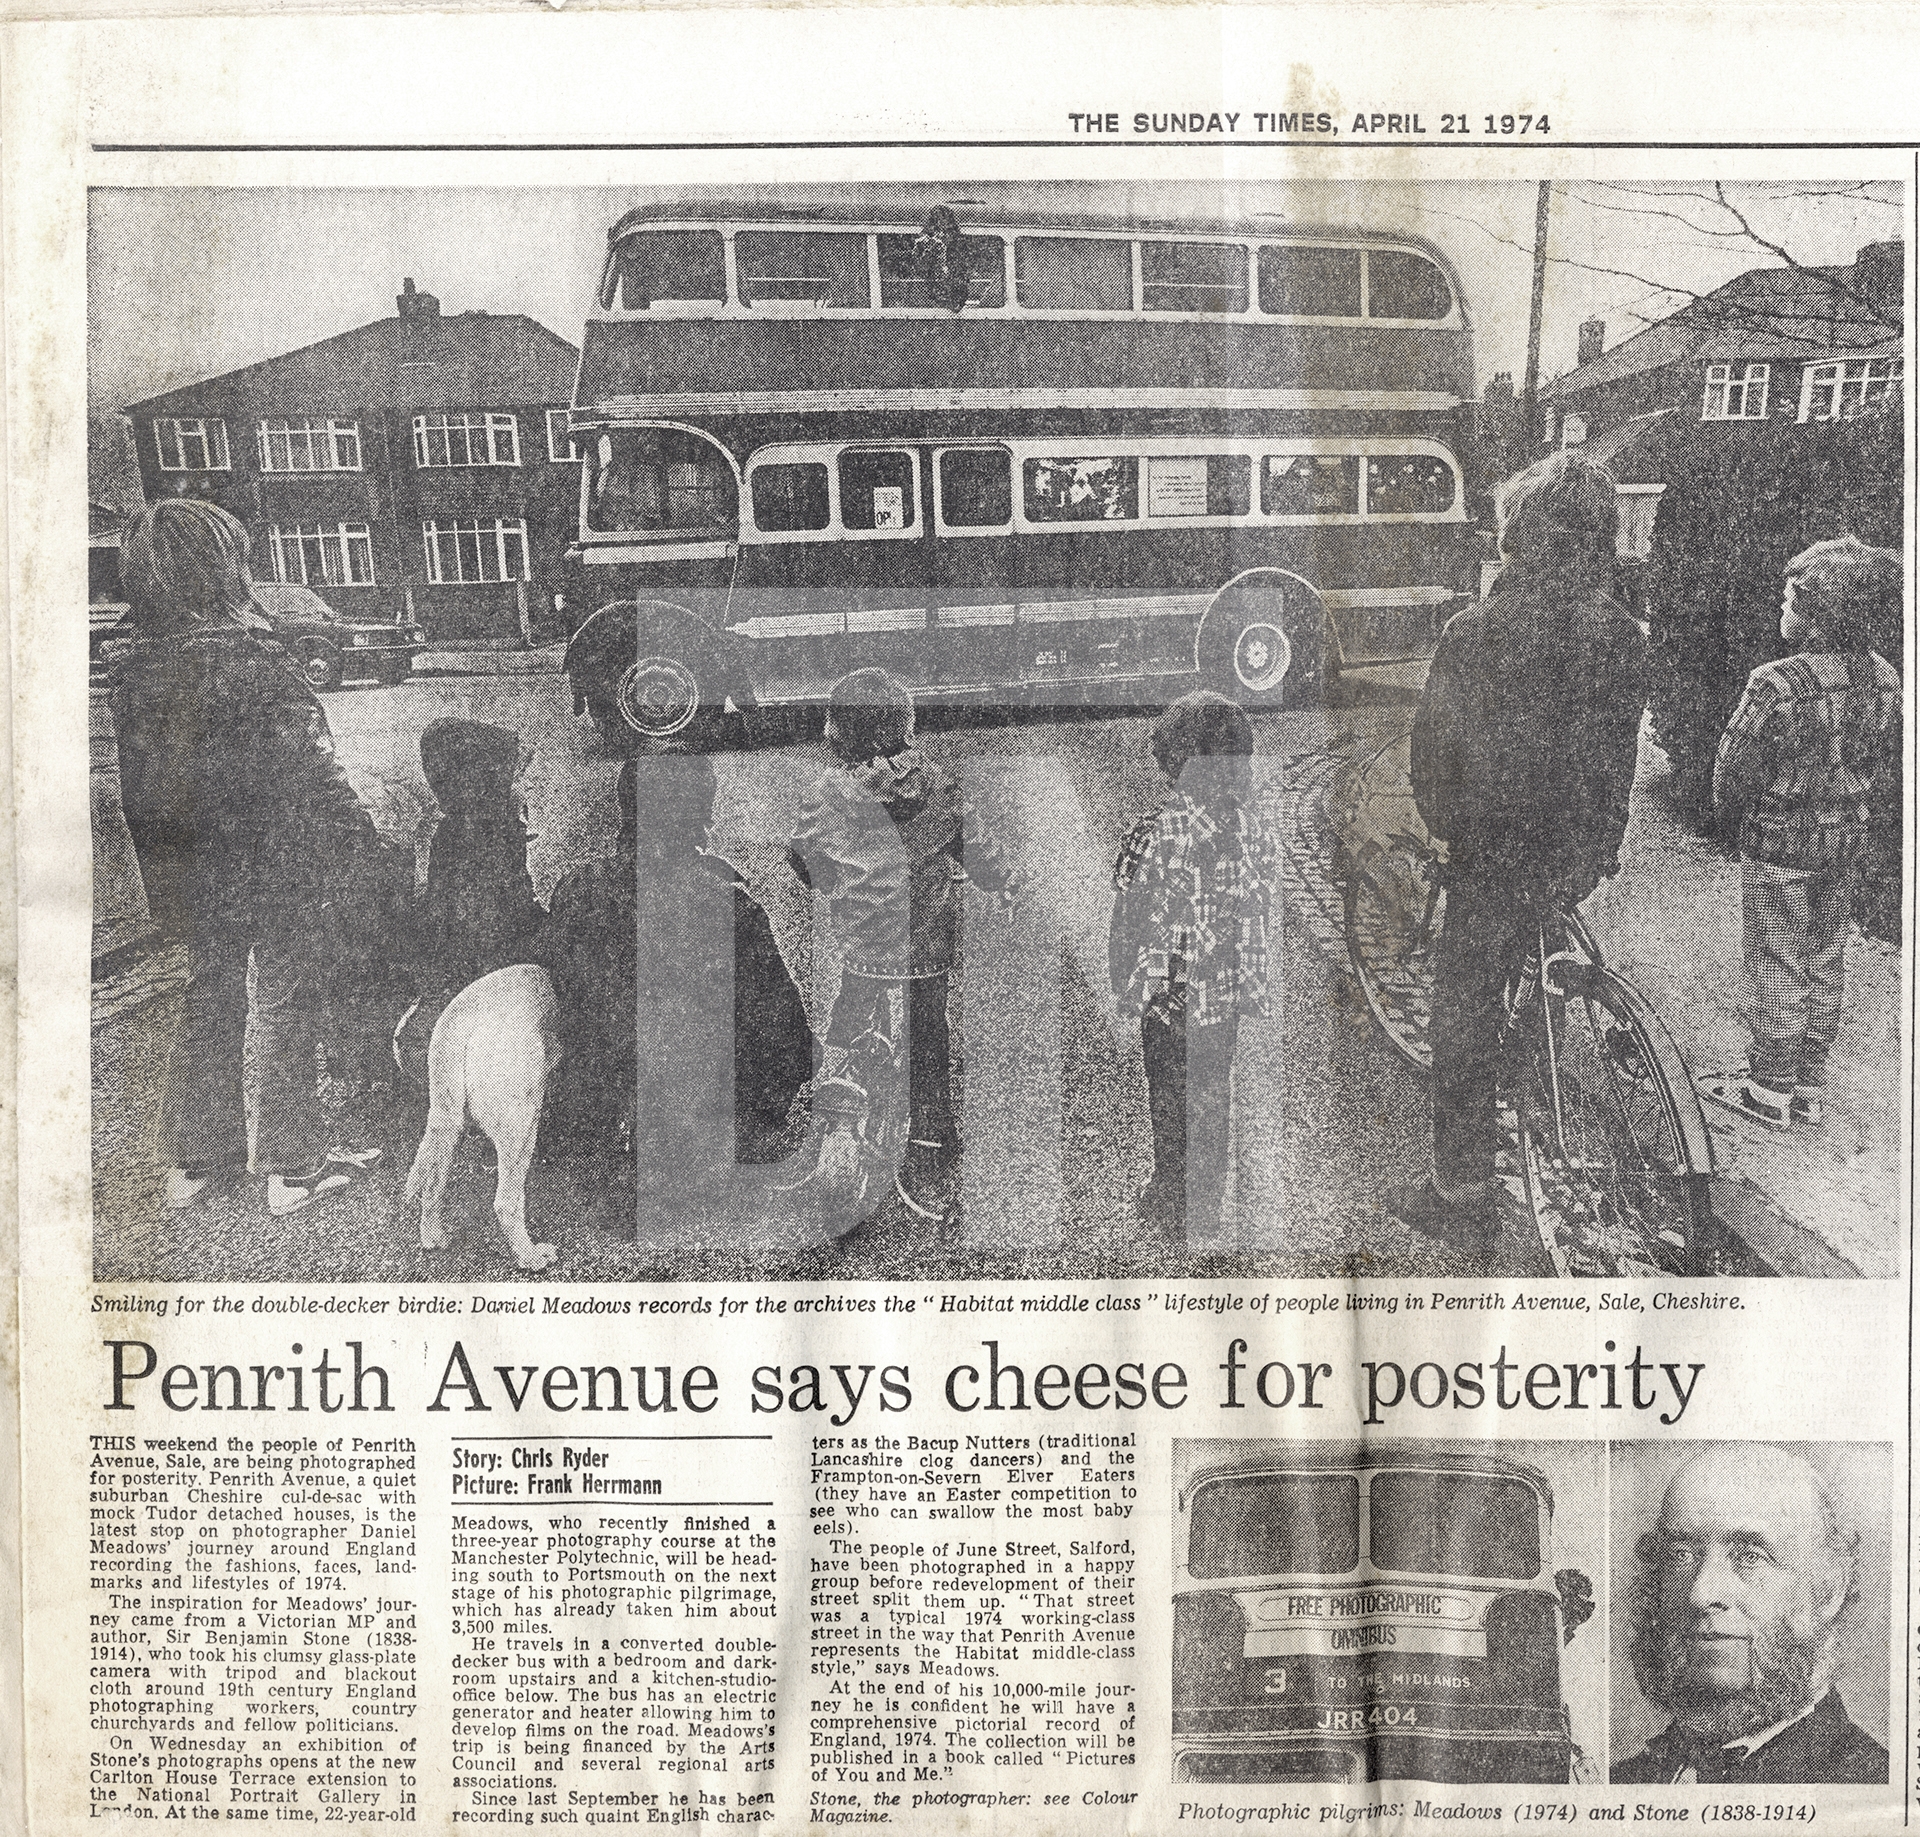 Sunday Times article about Daniel Meadows and the Free Photographic Omnibus. Penrith Avenue, Sale, Cheshire. 21 April 1974 by Daniel Meadows